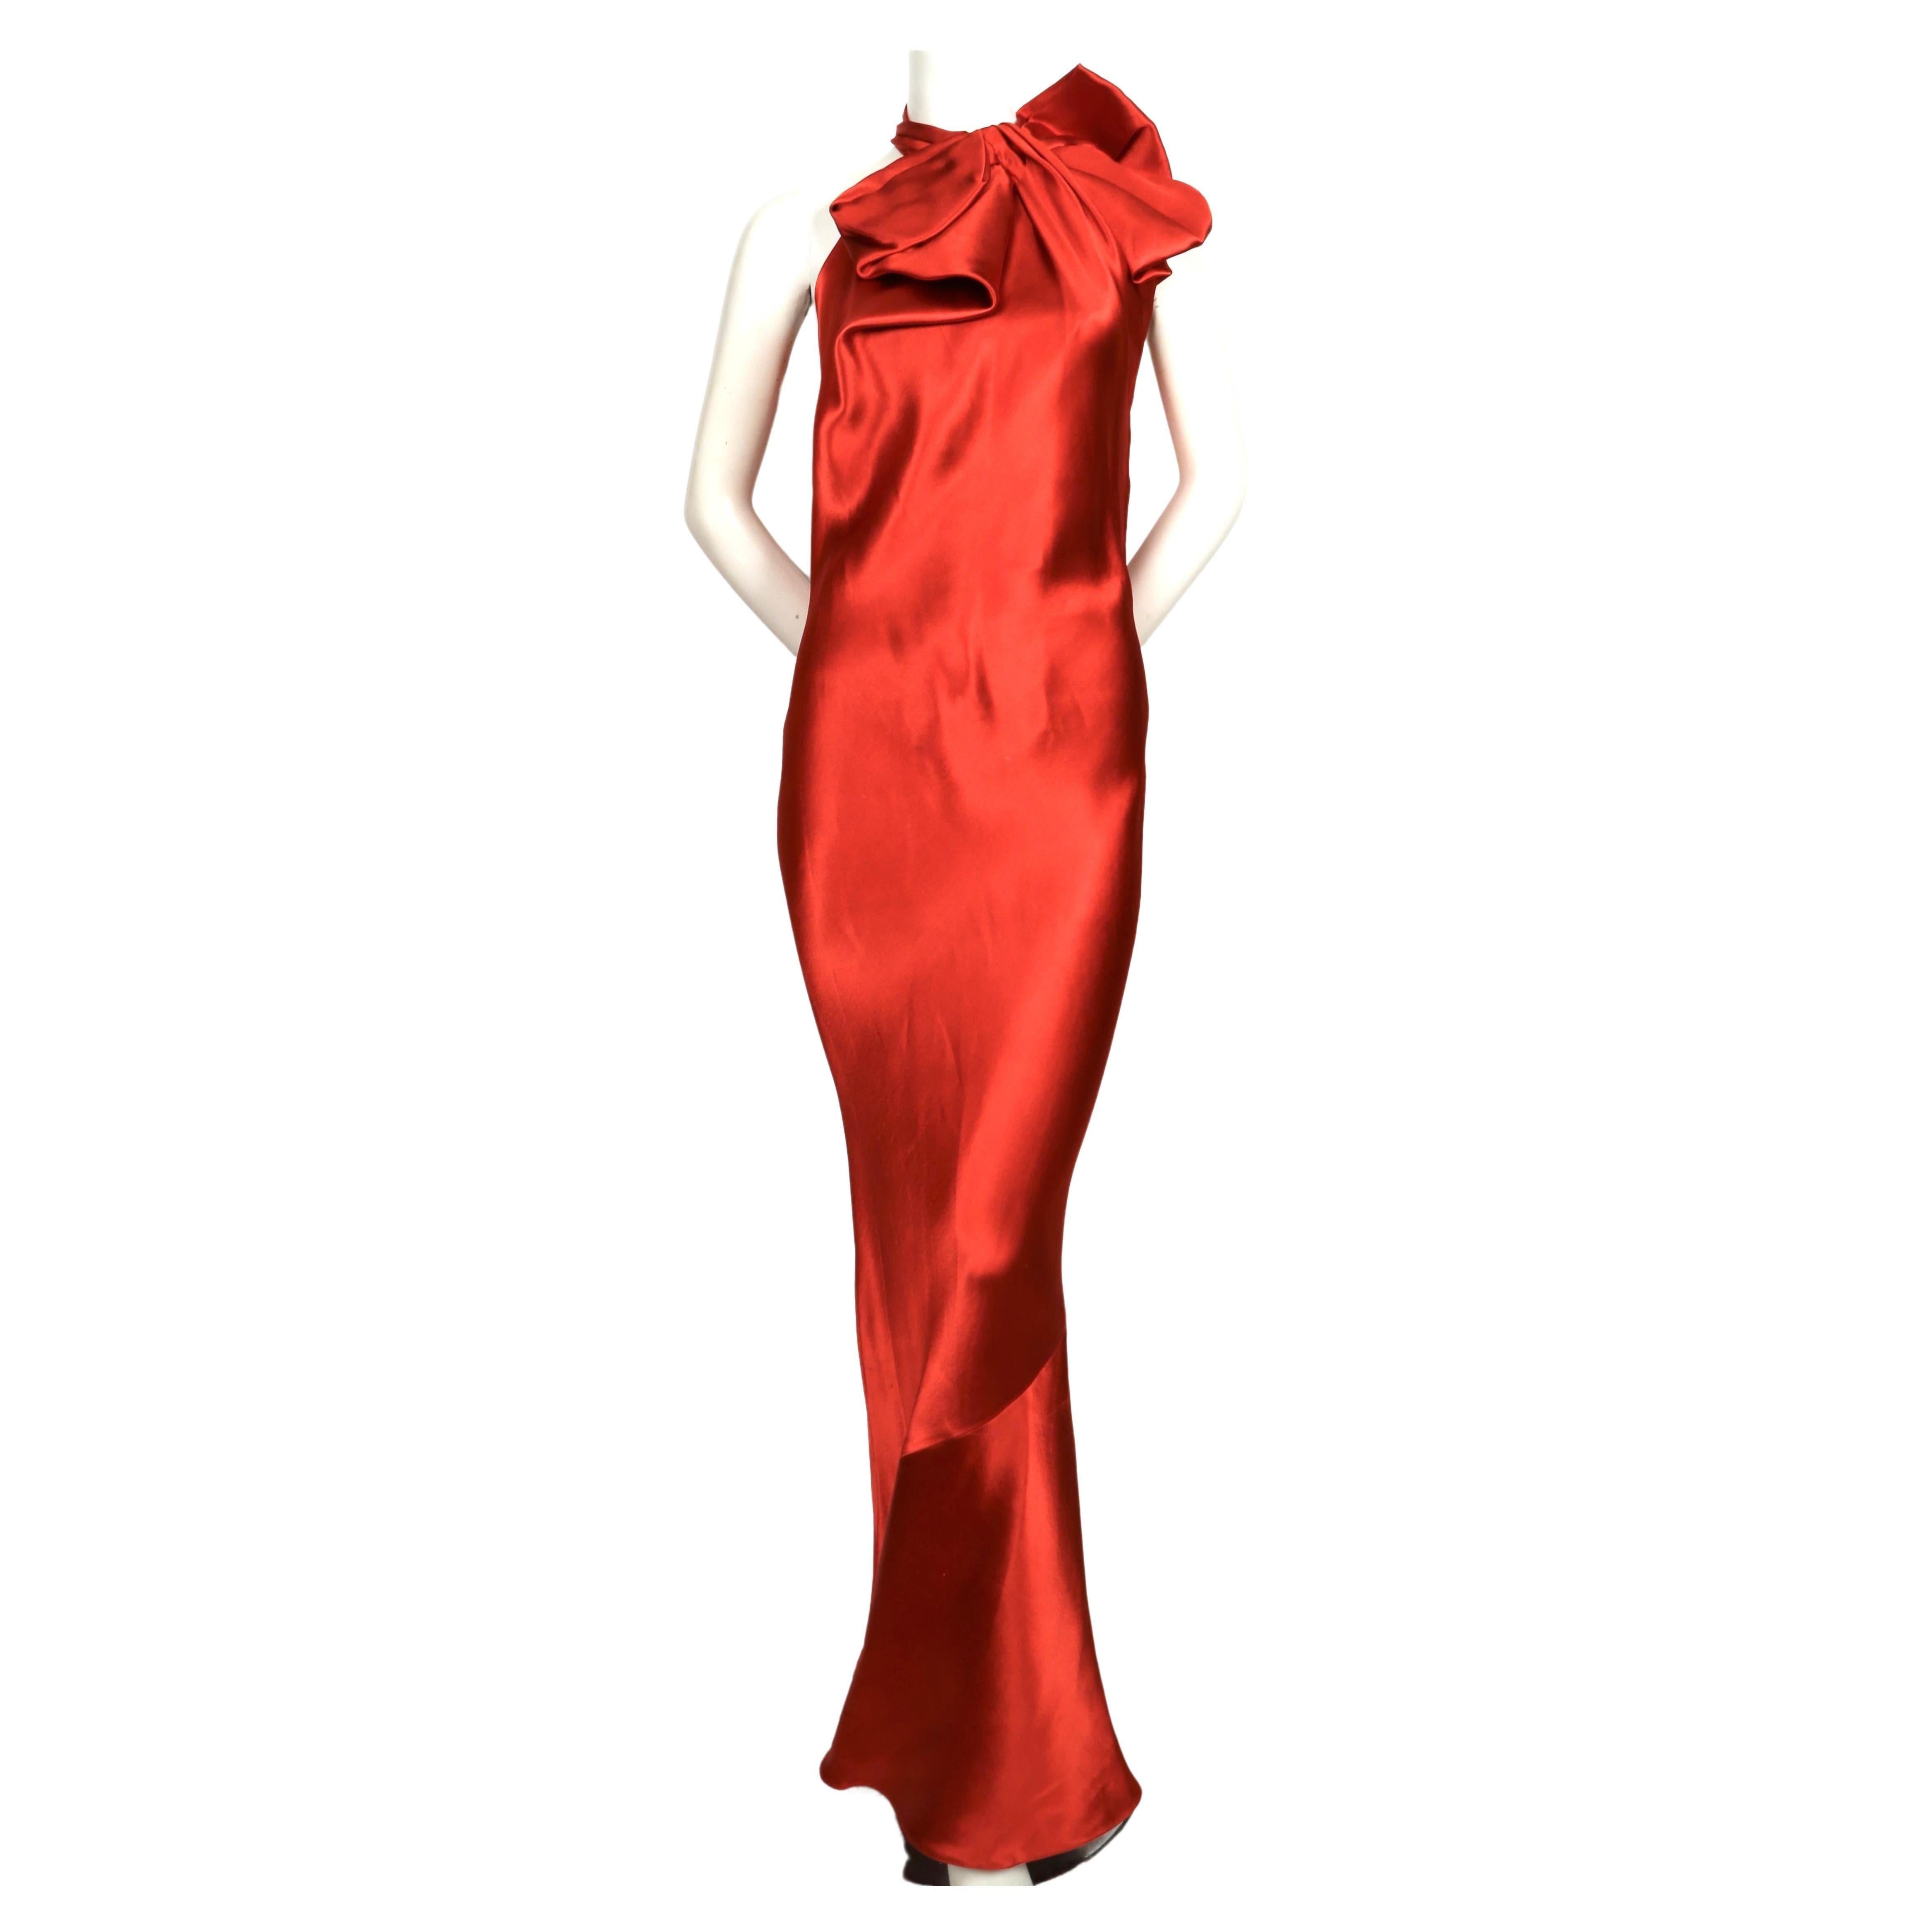 Rich, terra-cotta bias cut gown with trapped collar designed by Alber Elbaz for Lanvin dating to Fall of 2012. French size 38 however there is some flexibility in sizing due to the bias cut. Measurements are very difficult to accurately take because